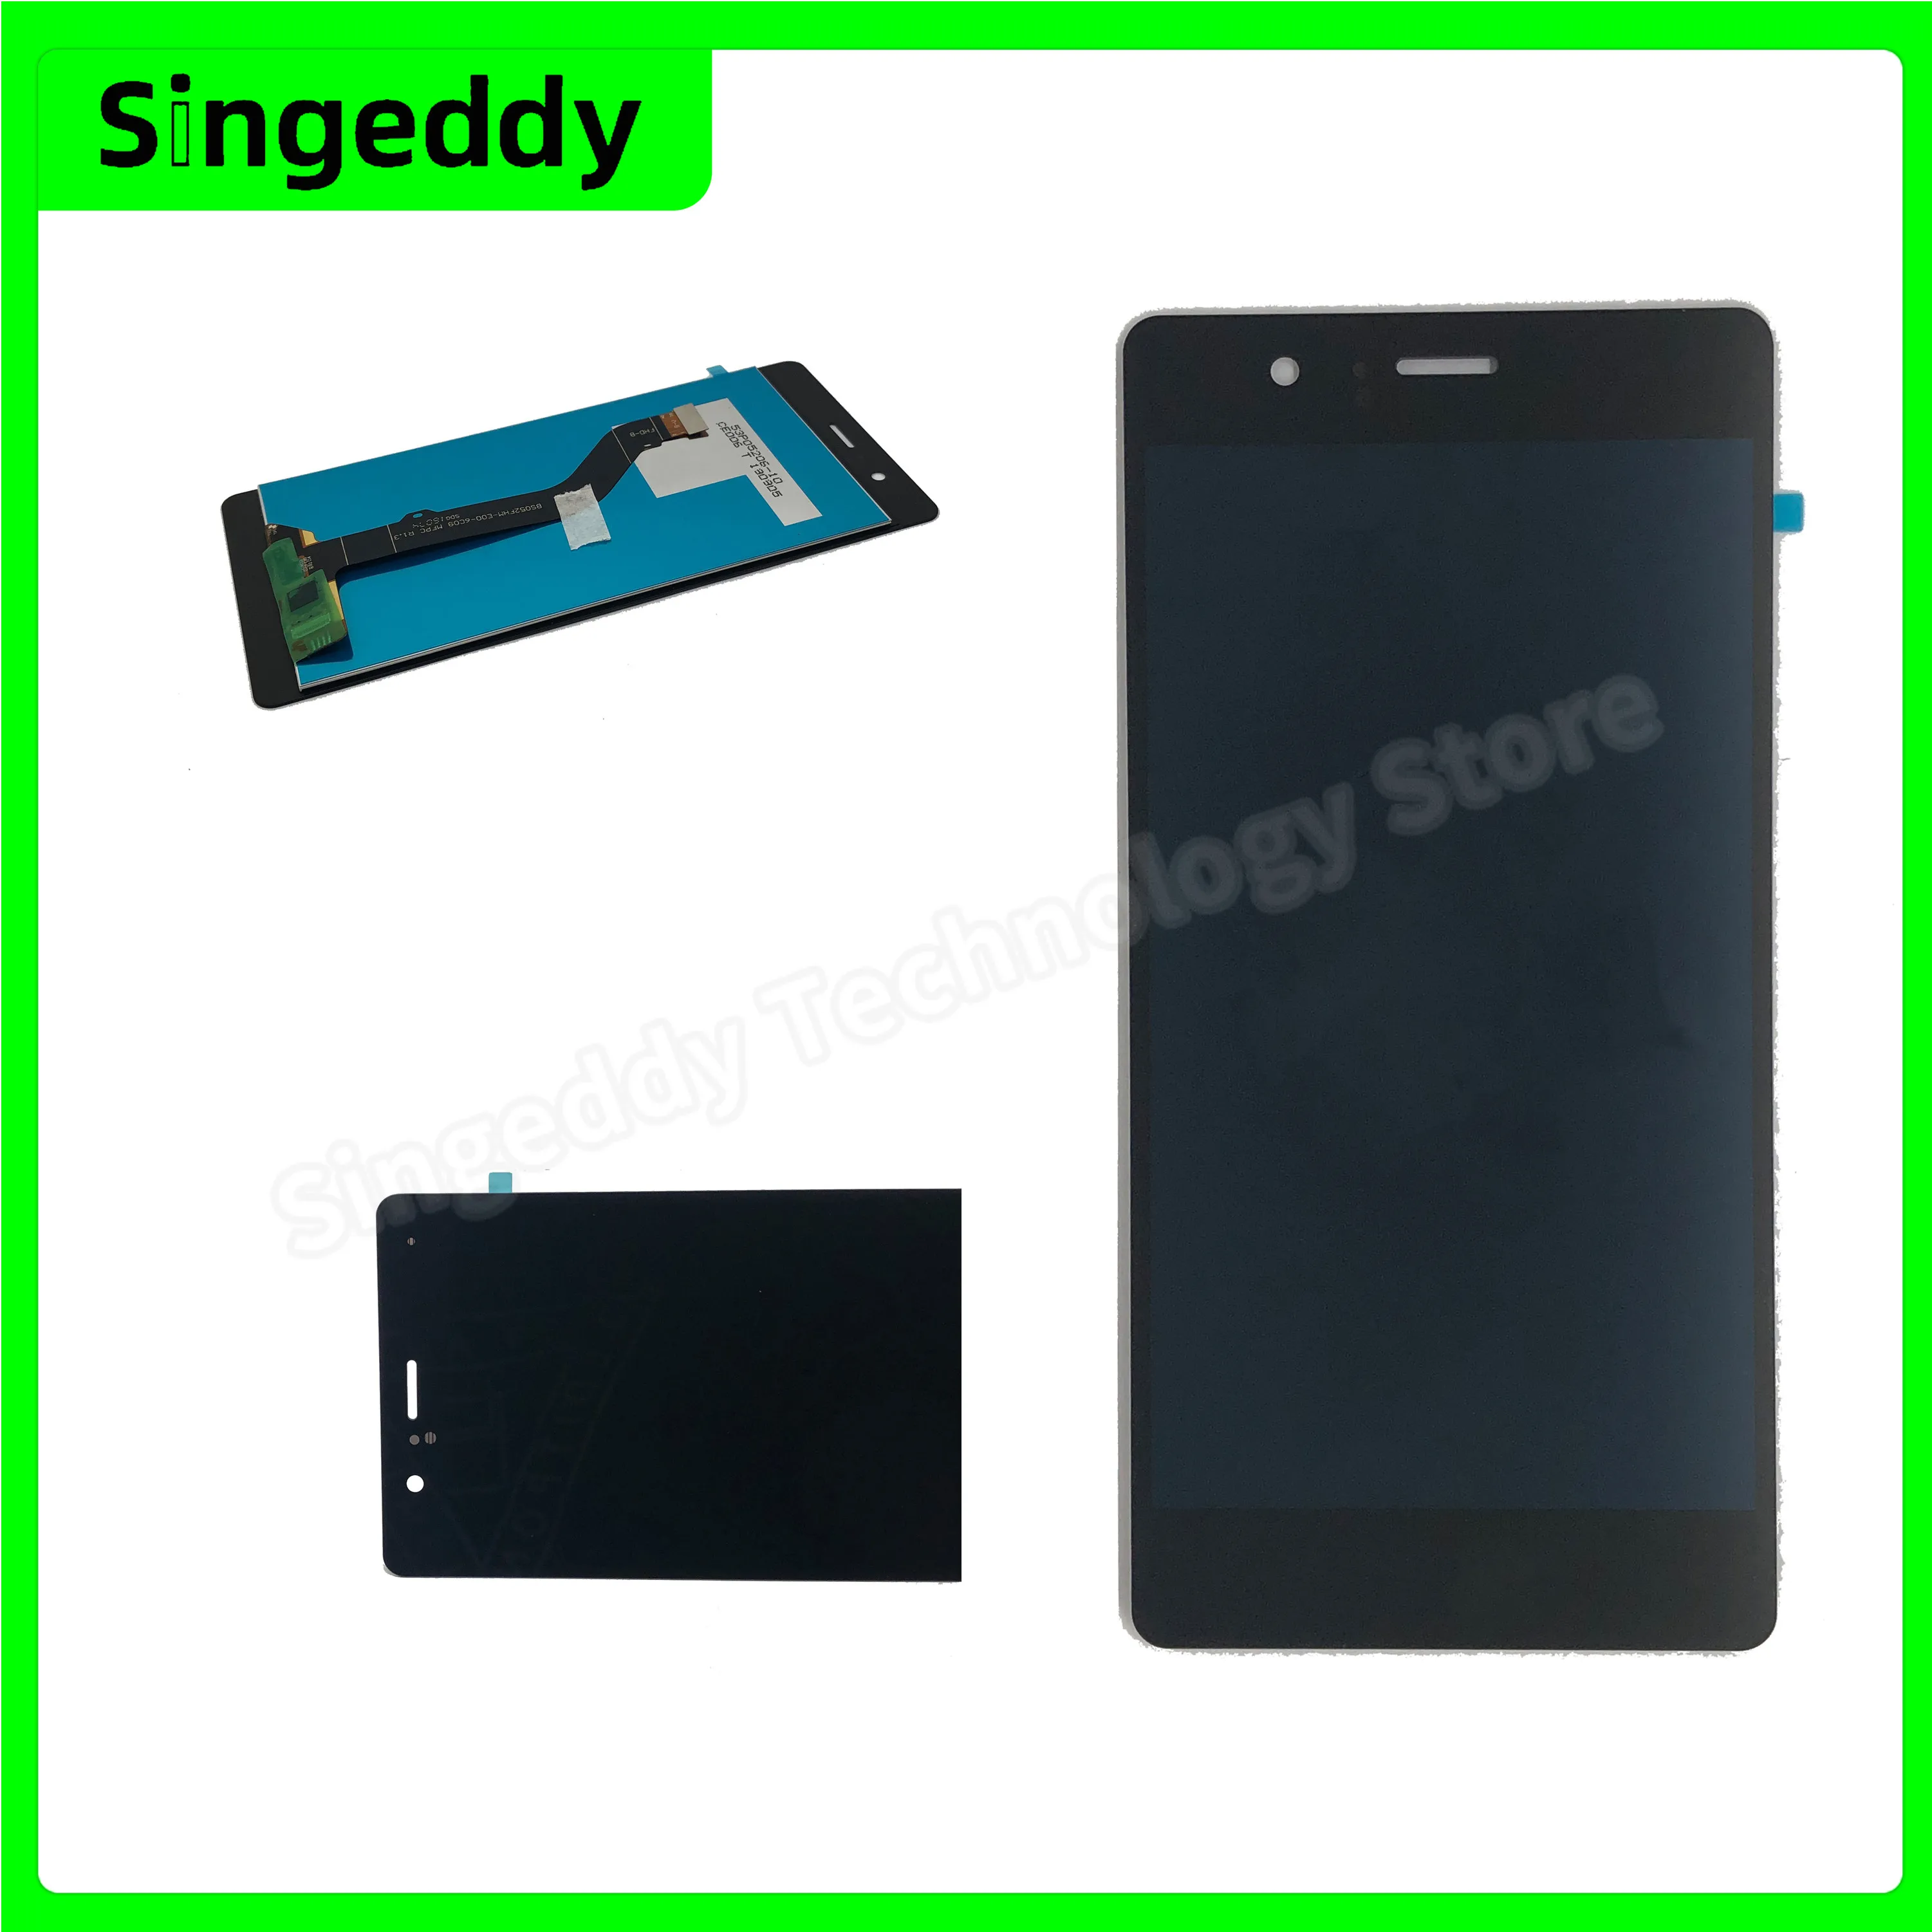 

For Huawei P9 Lite LCD Display For Huawei G9 1920*1080 Complete Touch Screen Digitizer Assembly VNS-L21 VNS-L22 VNS-L23 VNS-L31